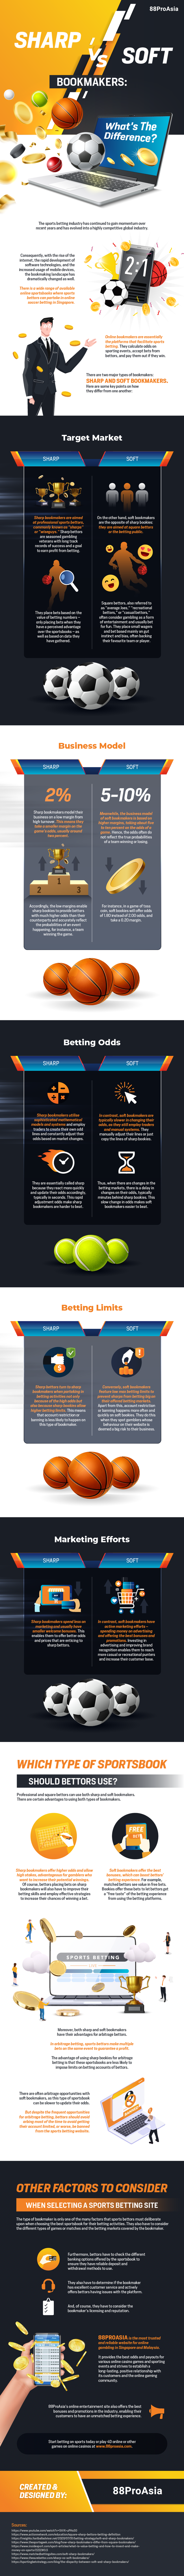 Sharp-vs-Soft-Bookmakers-Whats-The-Difference-4d-too-horse-racing-online-casino-sports-betting-bet-singapore-malaysia-Infographic